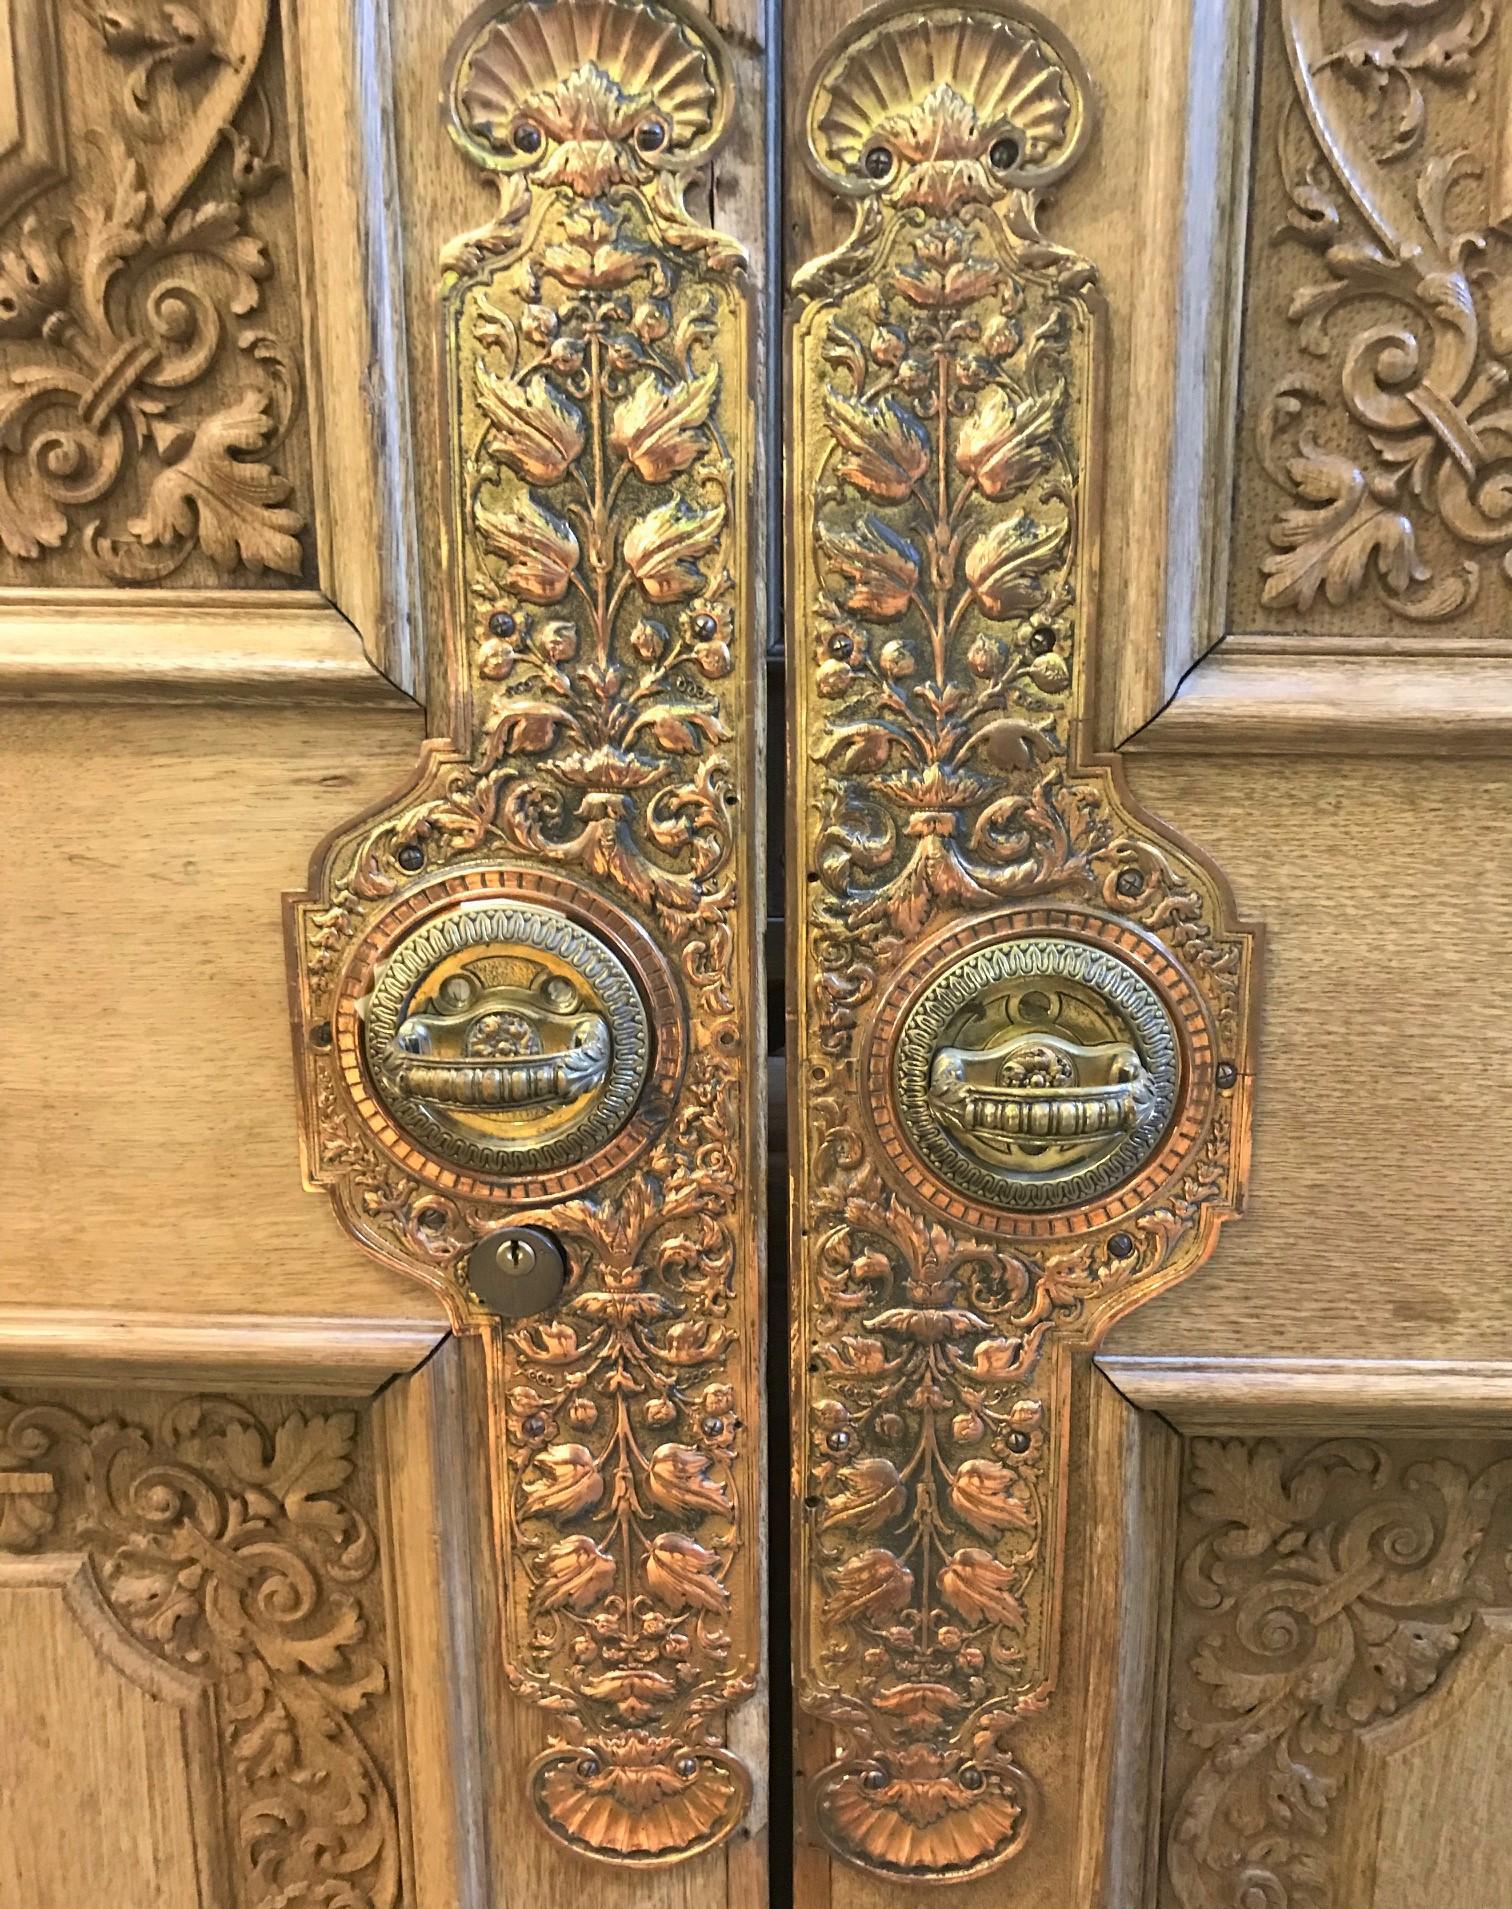 Superb pair of 19th century Continental carved oak doors, double panels with finally detailed carvings of acanthus leaves, fluer-de-lis, and sea shells. The intricate brass and copper embossed handles and escutcheons with similar